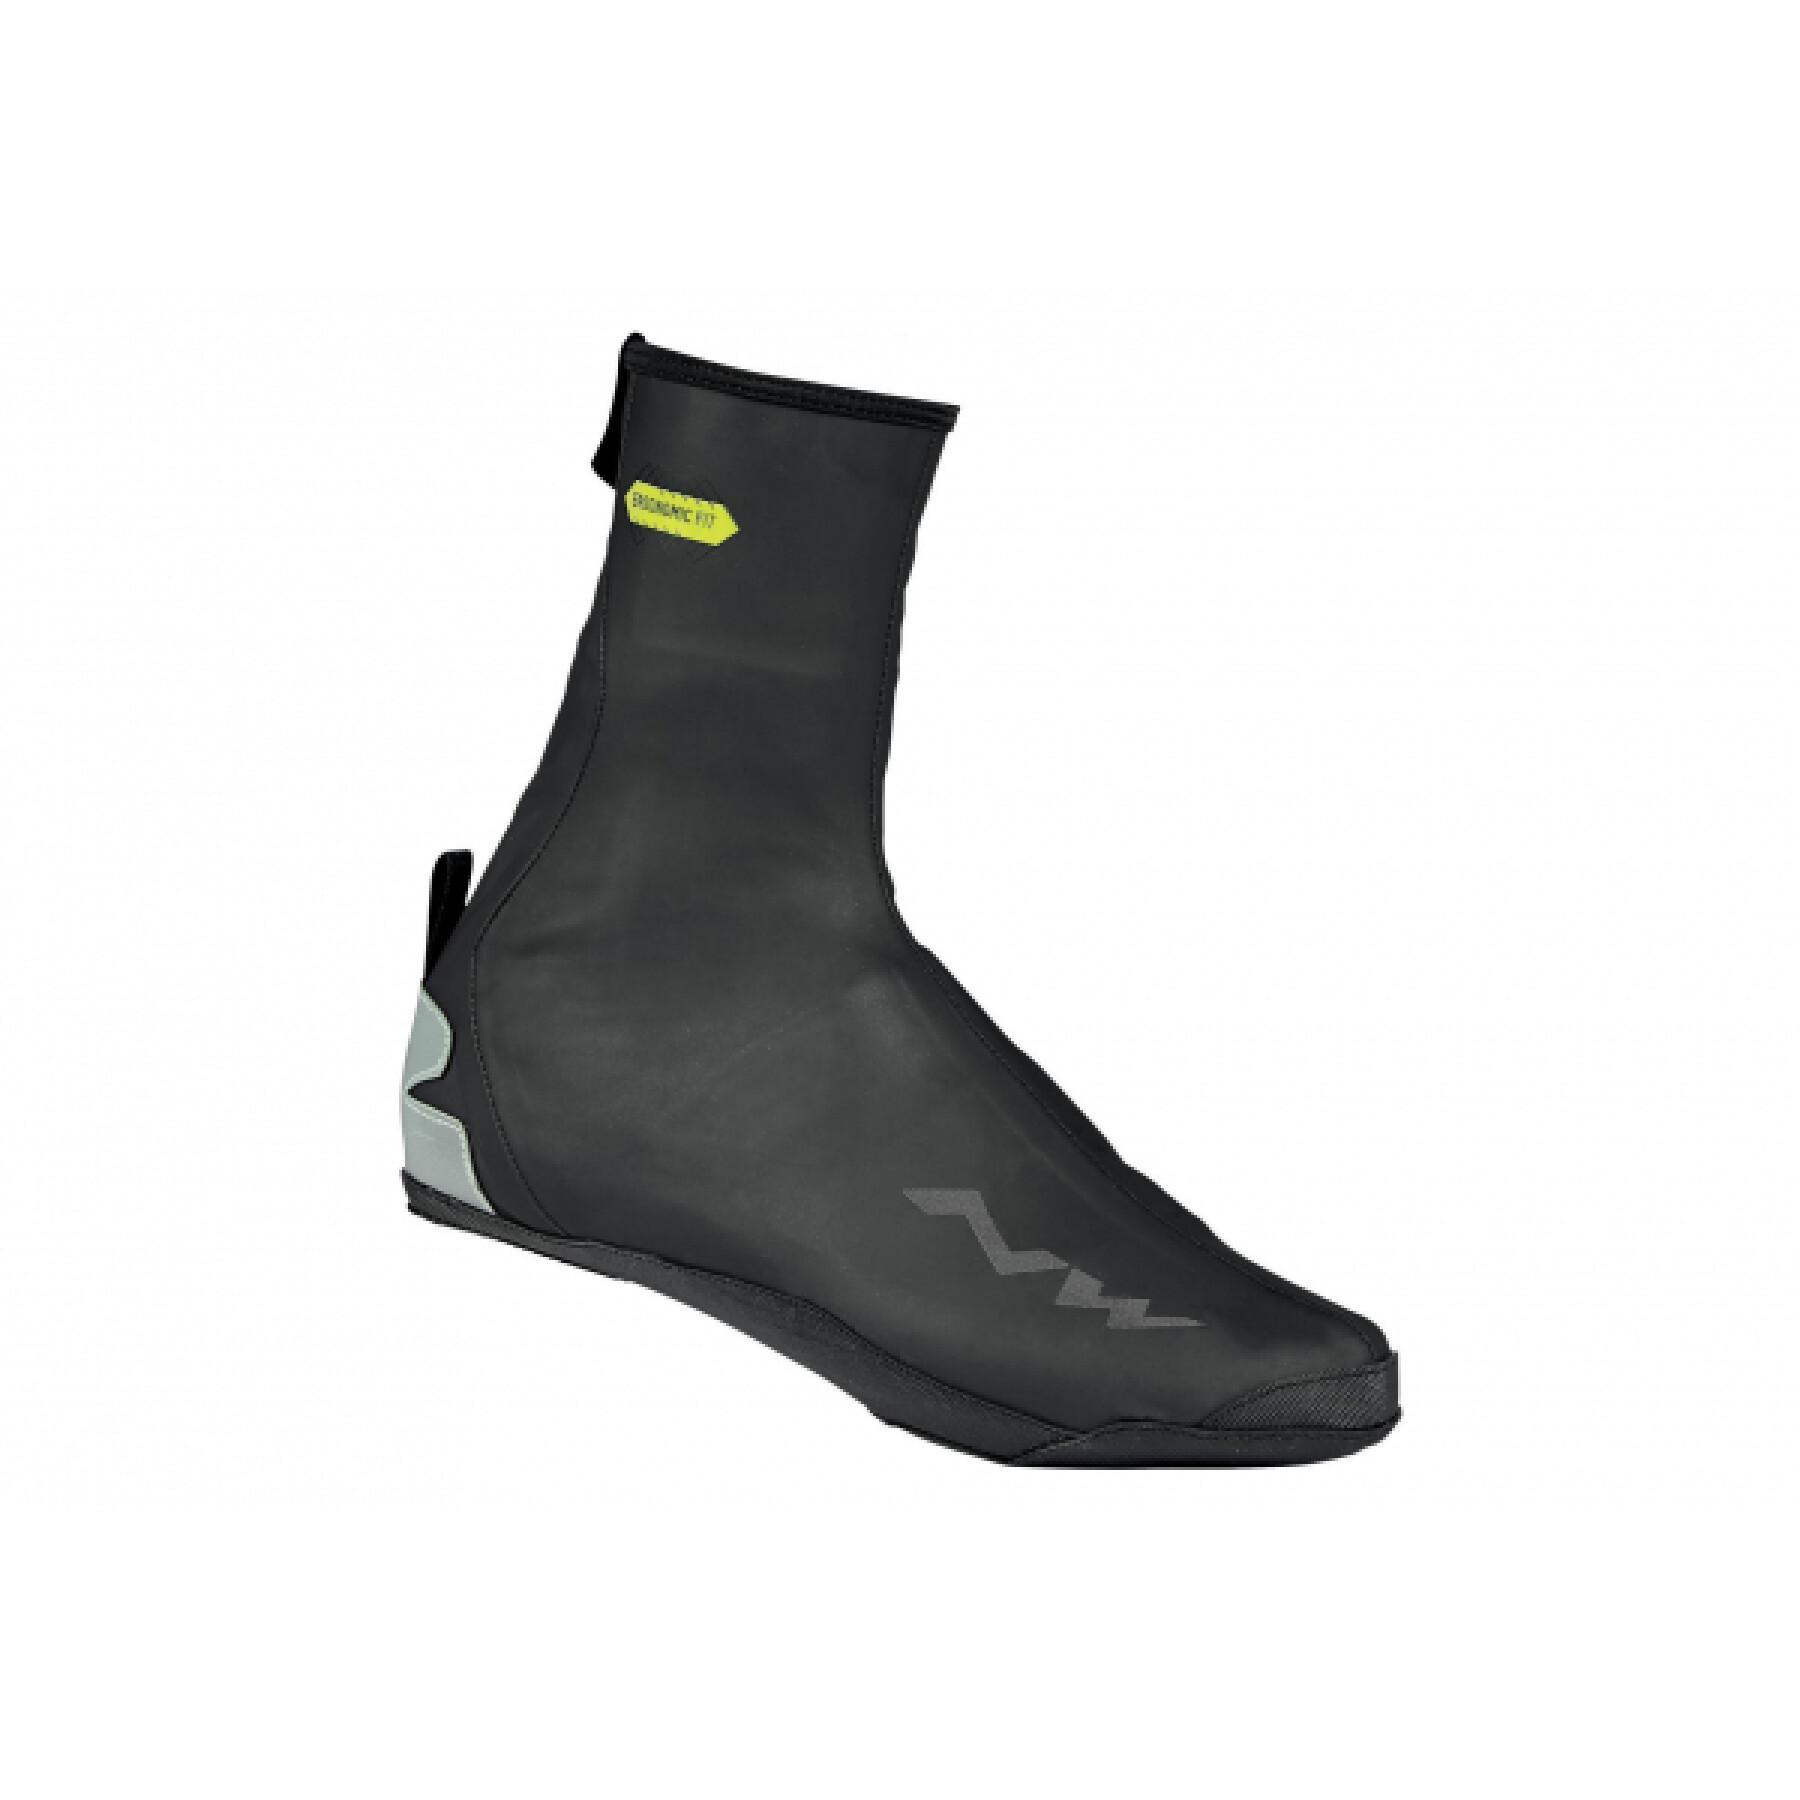 Shoe covers Northwave Extreme H20